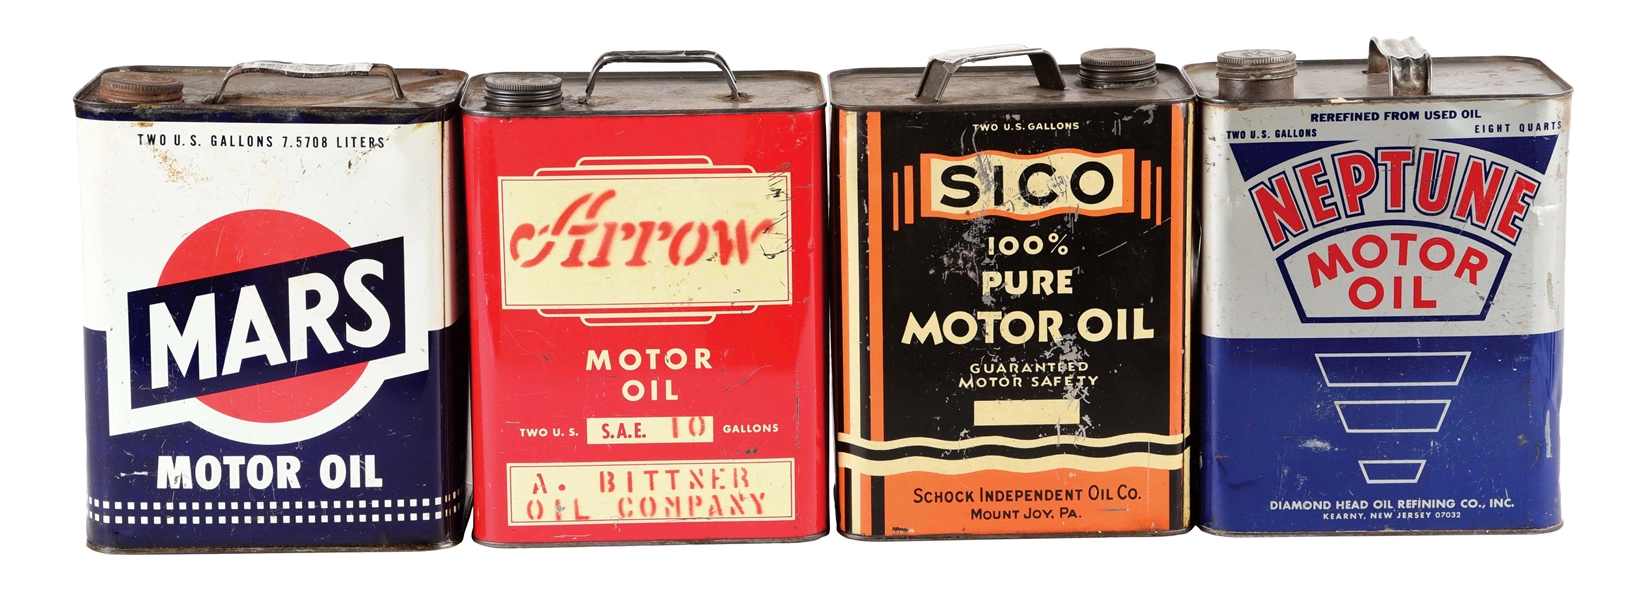 LOT OF 4: TWO GALLON MOTOR OIL CANS FROM SICO, MARS, NEPTUNE & DEPENDABLE MOTOR OILS. 